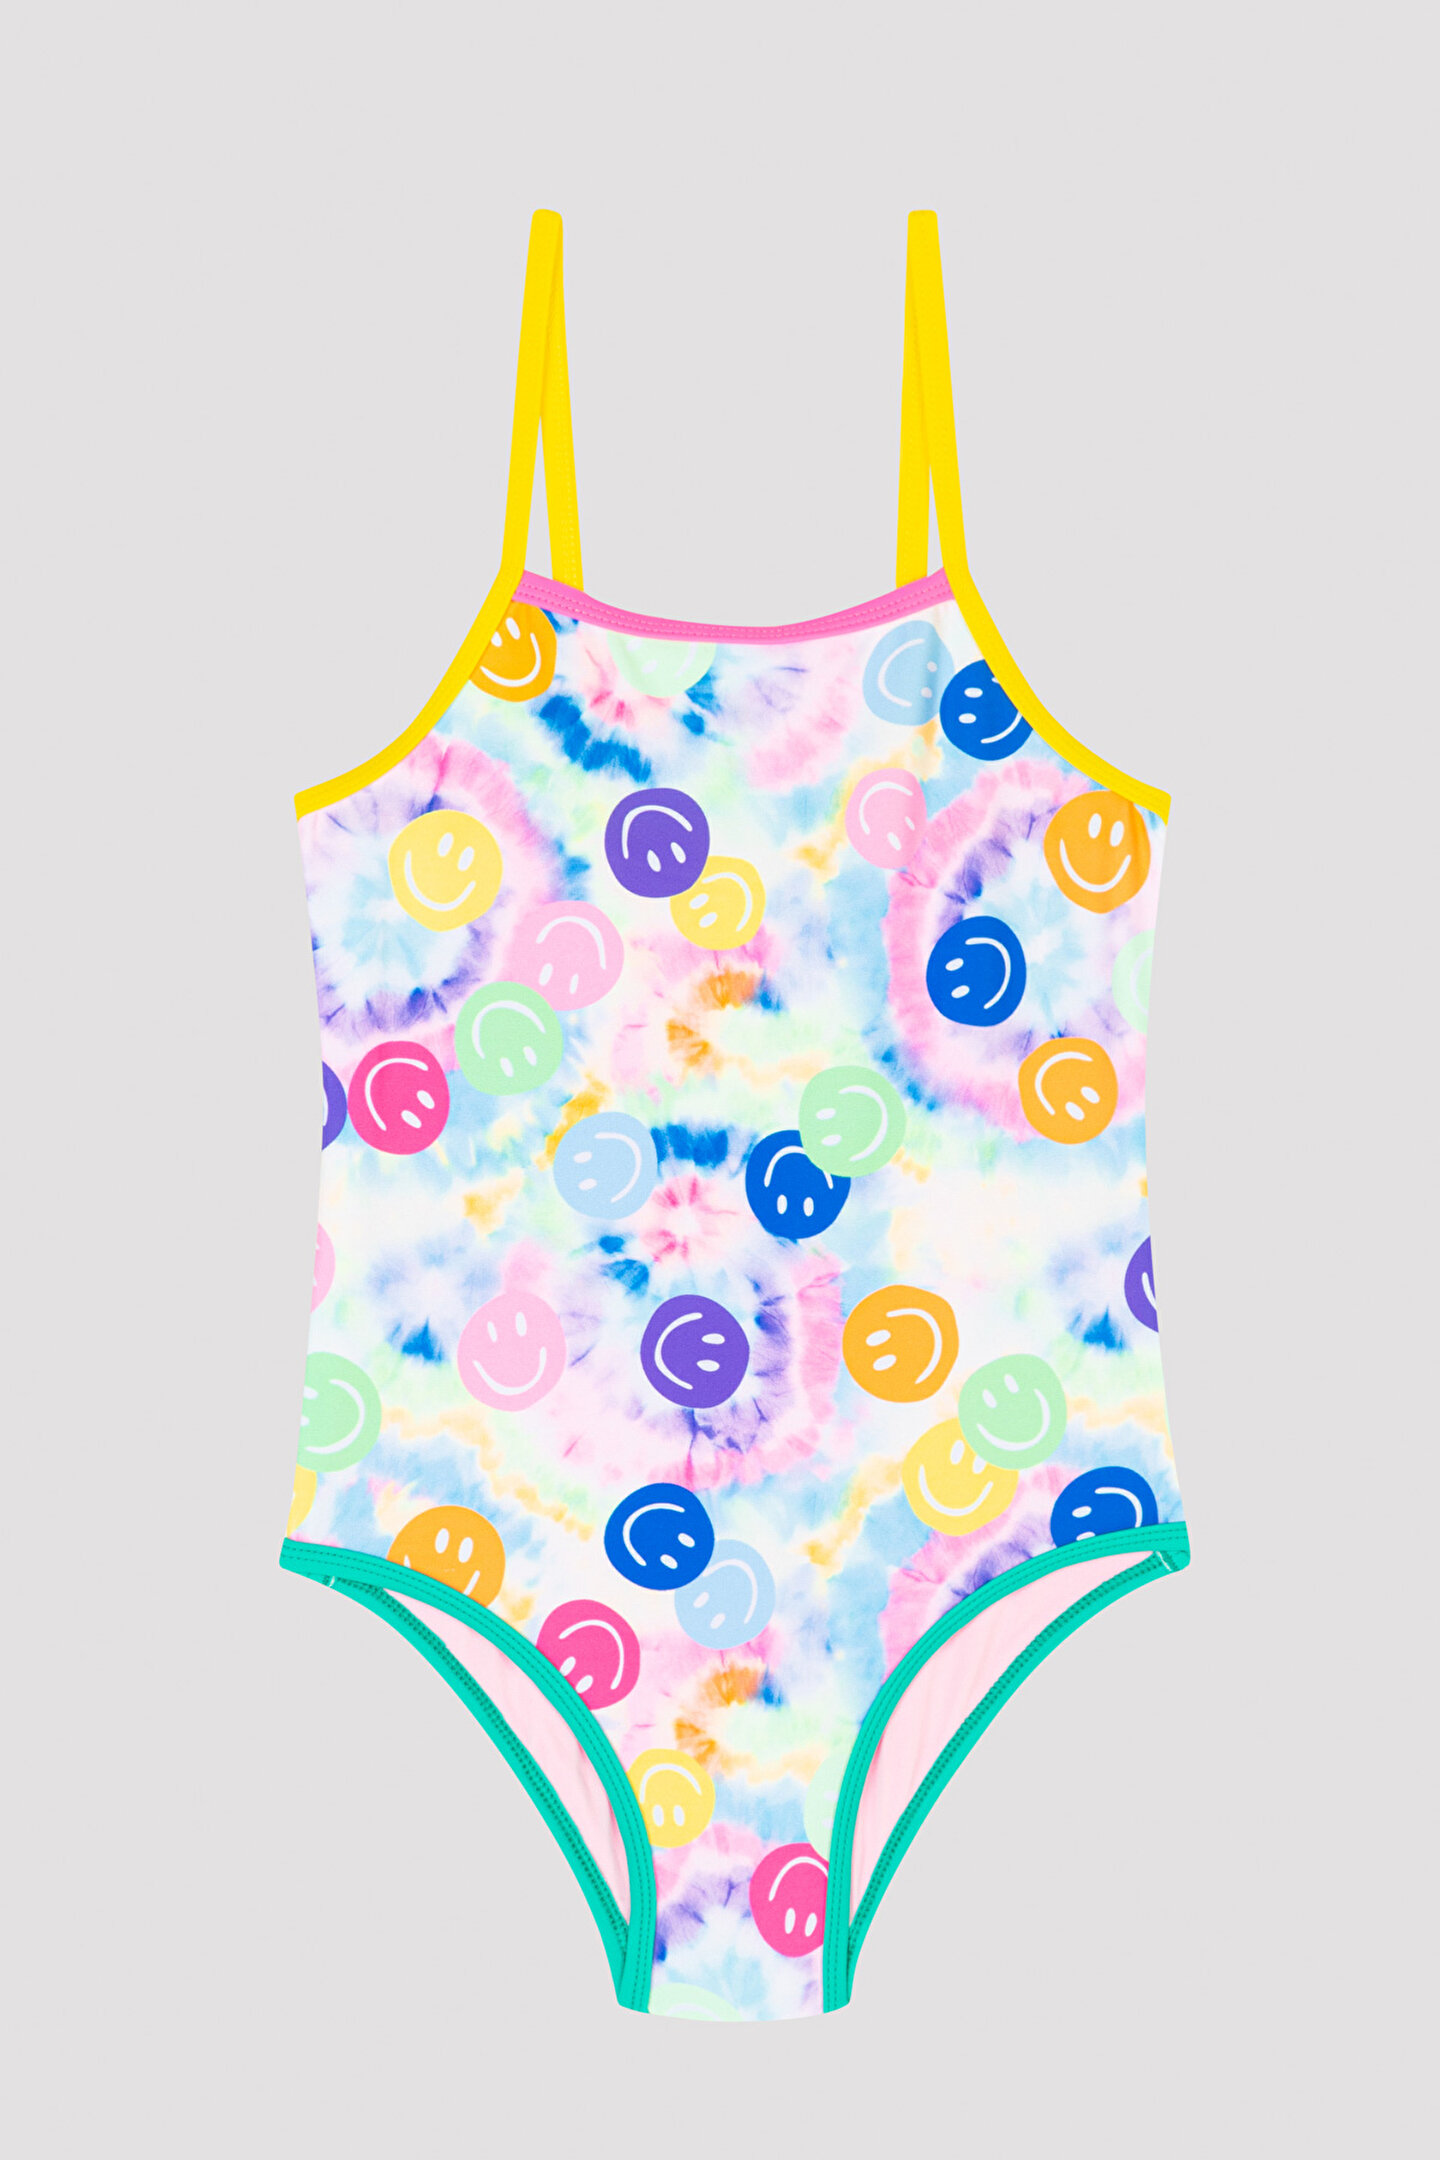 Girls Colorful Smiley Suit - 1